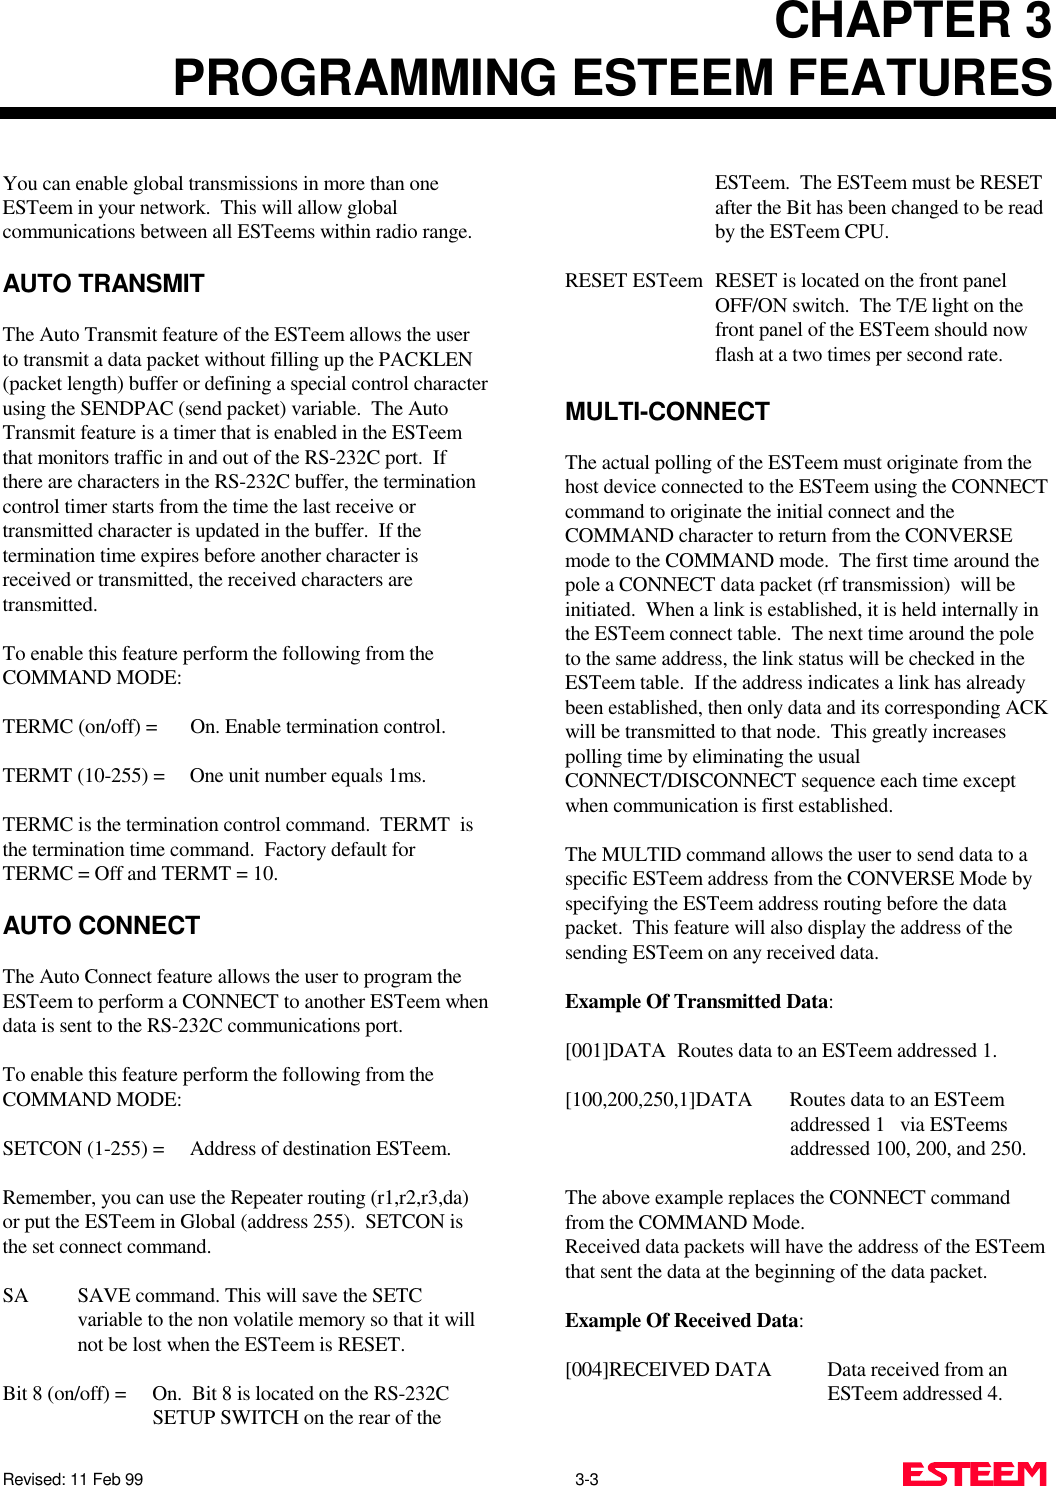 CHAPTER 3PROGRAMMING ESTEEM FEATURESRevised: 11 Feb 99                                                                                                3-3     You can enable global transmissions in more than oneESTeem in your network.  This will allow globalcommunications between all ESTeems within radio range.AUTO TRANSMITThe Auto Transmit feature of the ESTeem allows the userto transmit a data packet without filling up the PACKLEN(packet length) buffer or defining a special control characterusing the SENDPAC (send packet) variable.  The AutoTransmit feature is a timer that is enabled in the ESTeemthat monitors traffic in and out of the RS-232C port.  Ifthere are characters in the RS-232C buffer, the terminationcontrol timer starts from the time the last receive ortransmitted character is updated in the buffer.  If thetermination time expires before another character isreceived or transmitted, the received characters aretransmitted.To enable this feature perform the following from theCOMMAND MODE:TERMC (on/off) = On. Enable termination control.TERMT (10-255) = One unit number equals 1ms.TERMC is the termination control command.  TERMT  isthe termination time command.  Factory default forTERMC = Off and TERMT = 10.AUTO CONNECTThe Auto Connect feature allows the user to program theESTeem to perform a CONNECT to another ESTeem whendata is sent to the RS-232C communications port.To enable this feature perform the following from theCOMMAND MODE:SETCON (1-255) = Address of destination ESTeem.Remember, you can use the Repeater routing (r1,r2,r3,da)or put the ESTeem in Global (address 255).  SETCON isthe set connect command.SA SAVE command. This will save the SETCvariable to the non volatile memory so that it willnot be lost when the ESTeem is RESET.Bit 8 (on/off) = On.  Bit 8 is located on the RS-232CSETUP SWITCH on the rear of theESTeem.  The ESTeem must be RESETafter the Bit has been changed to be readby the ESTeem CPU.RESET ESTeem RESET is located on the front panelOFF/ON switch.  The T/E light on thefront panel of the ESTeem should nowflash at a two times per second rate.MULTI-CONNECTThe actual polling of the ESTeem must originate from thehost device connected to the ESTeem using the CONNECTcommand to originate the initial connect and theCOMMAND character to return from the CONVERSEmode to the COMMAND mode.  The first time around thepole a CONNECT data packet (rf transmission)  will beinitiated.  When a link is established, it is held internally inthe ESTeem connect table.  The next time around the poleto the same address, the link status will be checked in theESTeem table.  If the address indicates a link has alreadybeen established, then only data and its corresponding ACKwill be transmitted to that node.  This greatly increasespolling time by eliminating the usualCONNECT/DISCONNECT sequence each time exceptwhen communication is first established.The MULTID command allows the user to send data to aspecific ESTeem address from the CONVERSE Mode byspecifying the ESTeem address routing before the datapacket.  This feature will also display the address of thesending ESTeem on any received data.Example Of Transmitted Data:[001]DATA Routes data to an ESTeem addressed 1.[100,200,250,1]DATA  Routes data to an ESTeemaddressed 1   via ESTeemsaddressed 100, 200, and 250.The above example replaces the CONNECT commandfrom the COMMAND Mode. Received data packets will have the address of the ESTeemthat sent the data at the beginning of the data packet.Example Of Received Data:[004]RECEIVED DATA Data received from anESTeem addressed 4.